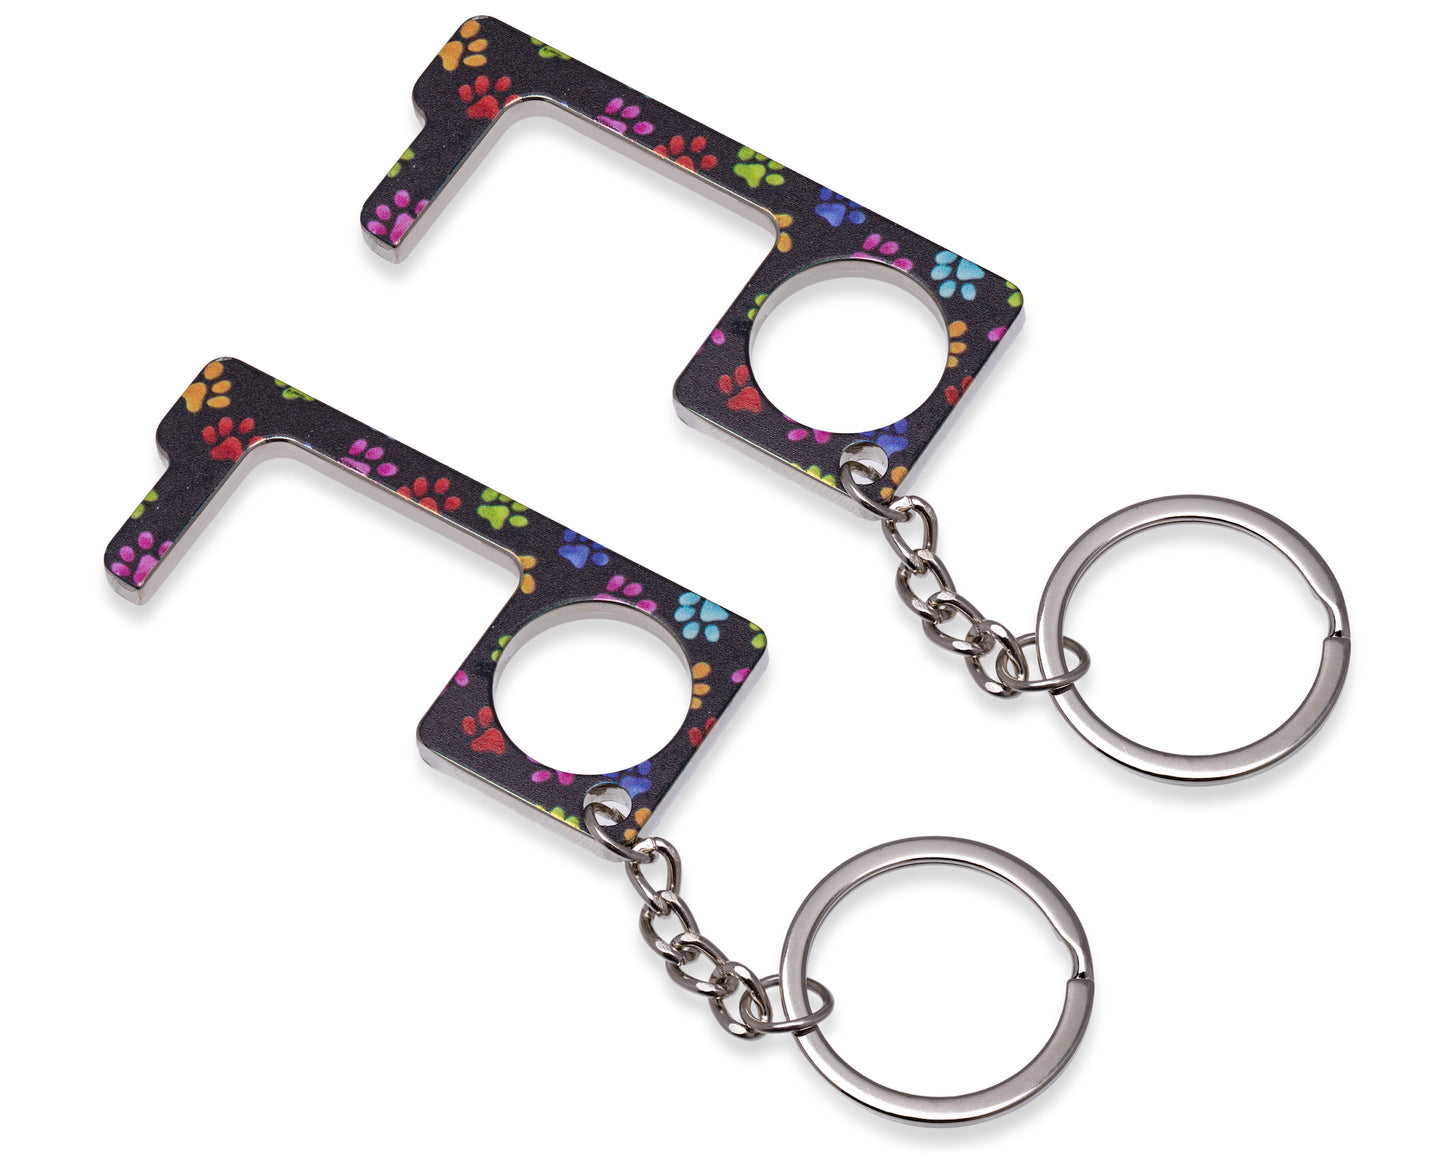 Black Multi Colored Paw Print No-touch Keychain Tool - Set Of 2